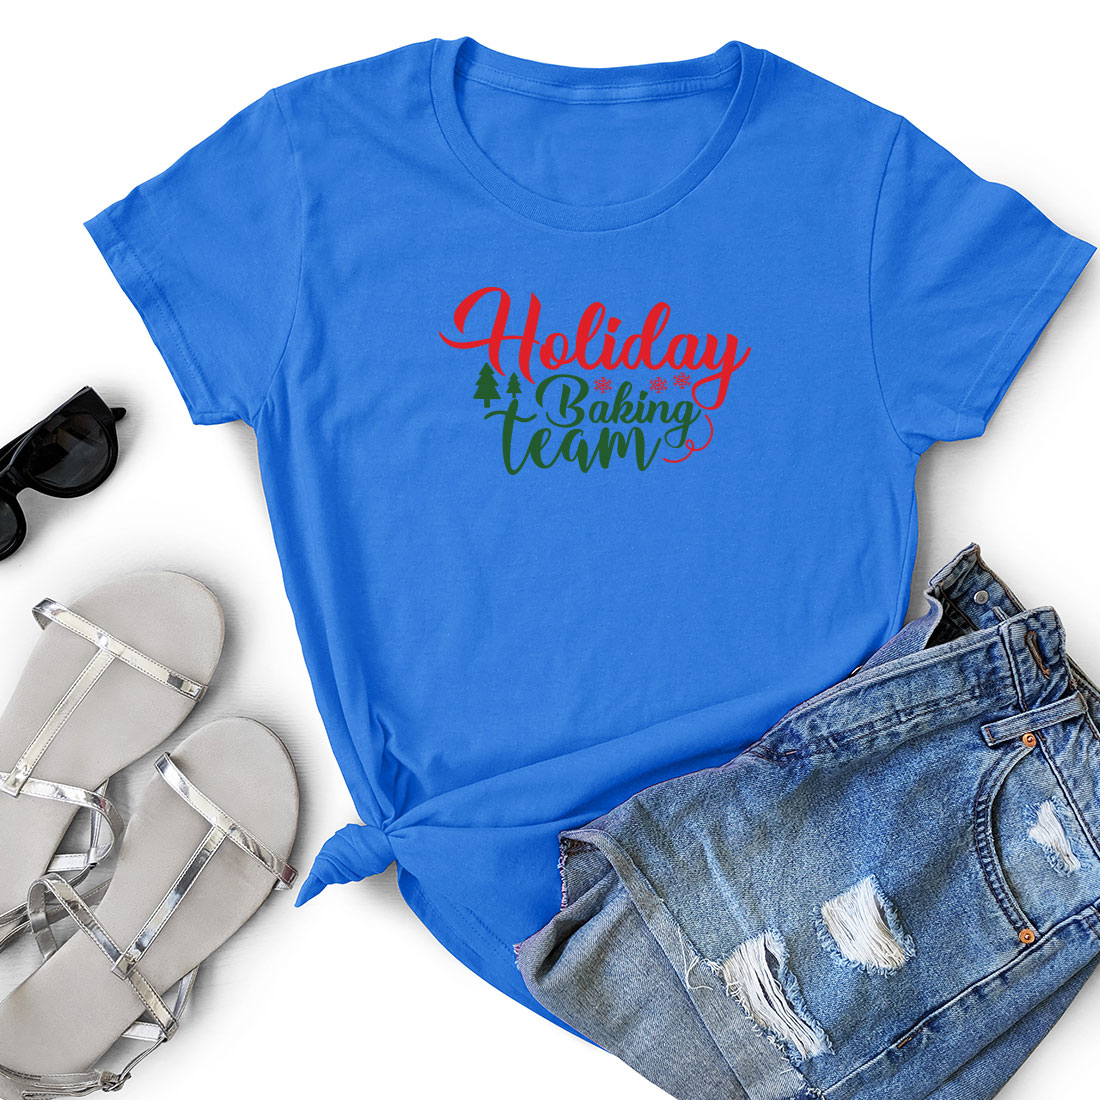 T - shirt that says holiday baking team next to a pair of shorts.